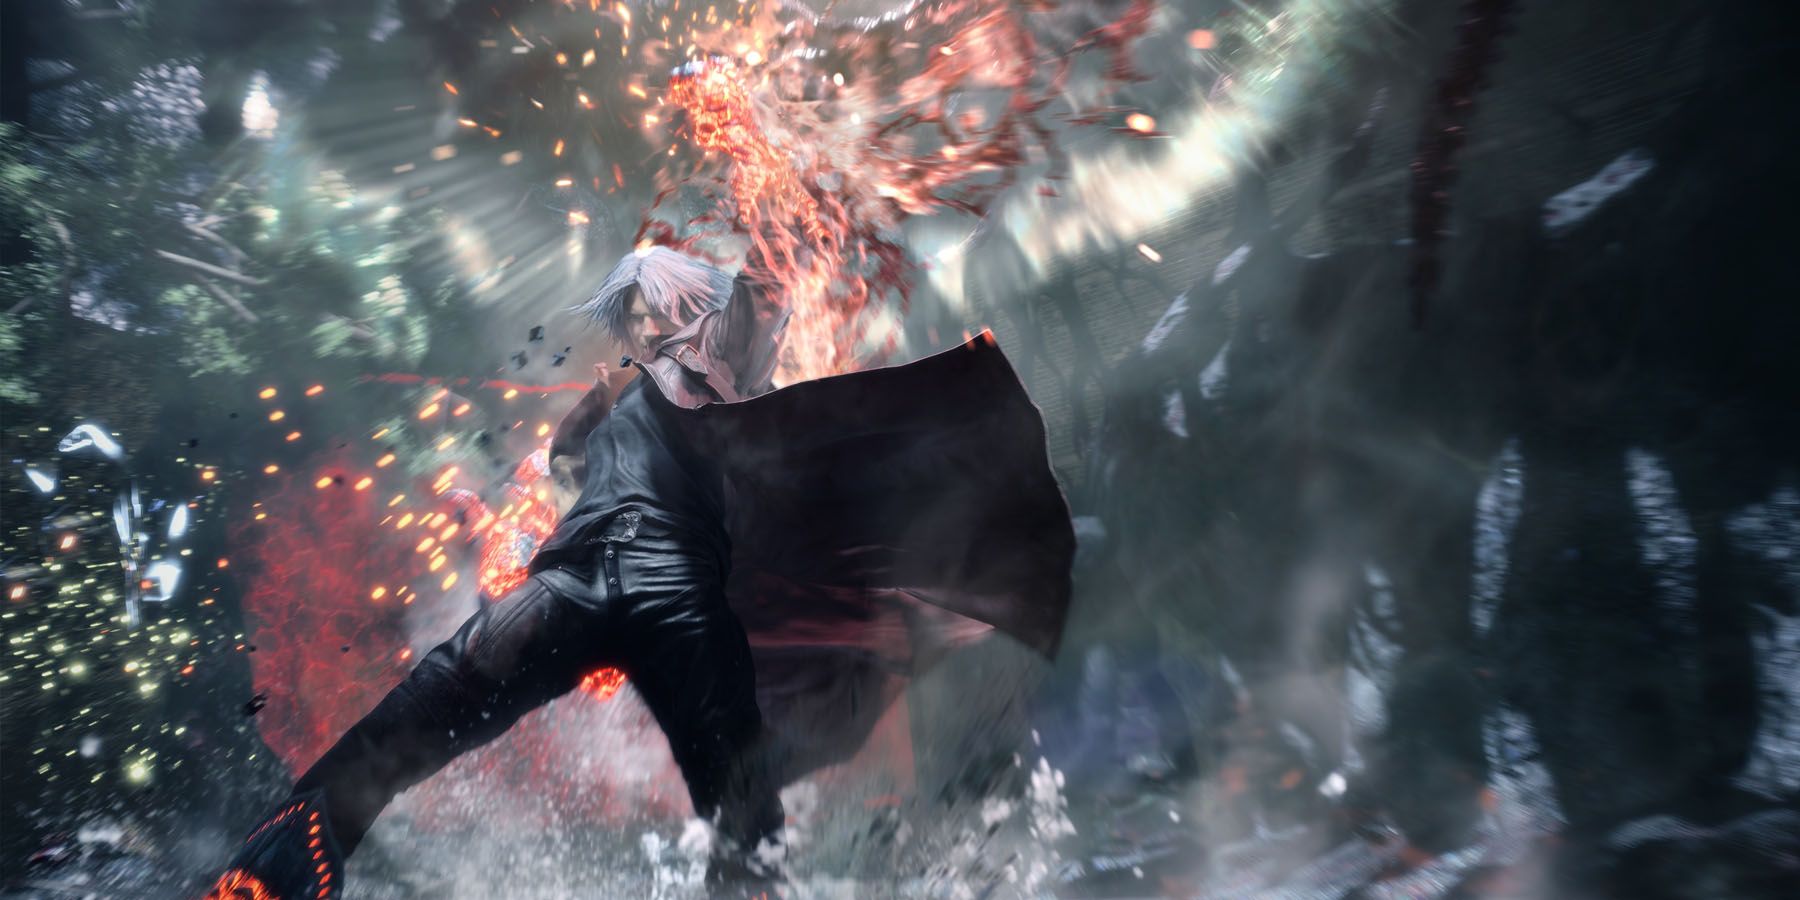 Dante sliding from an attack with Balrog